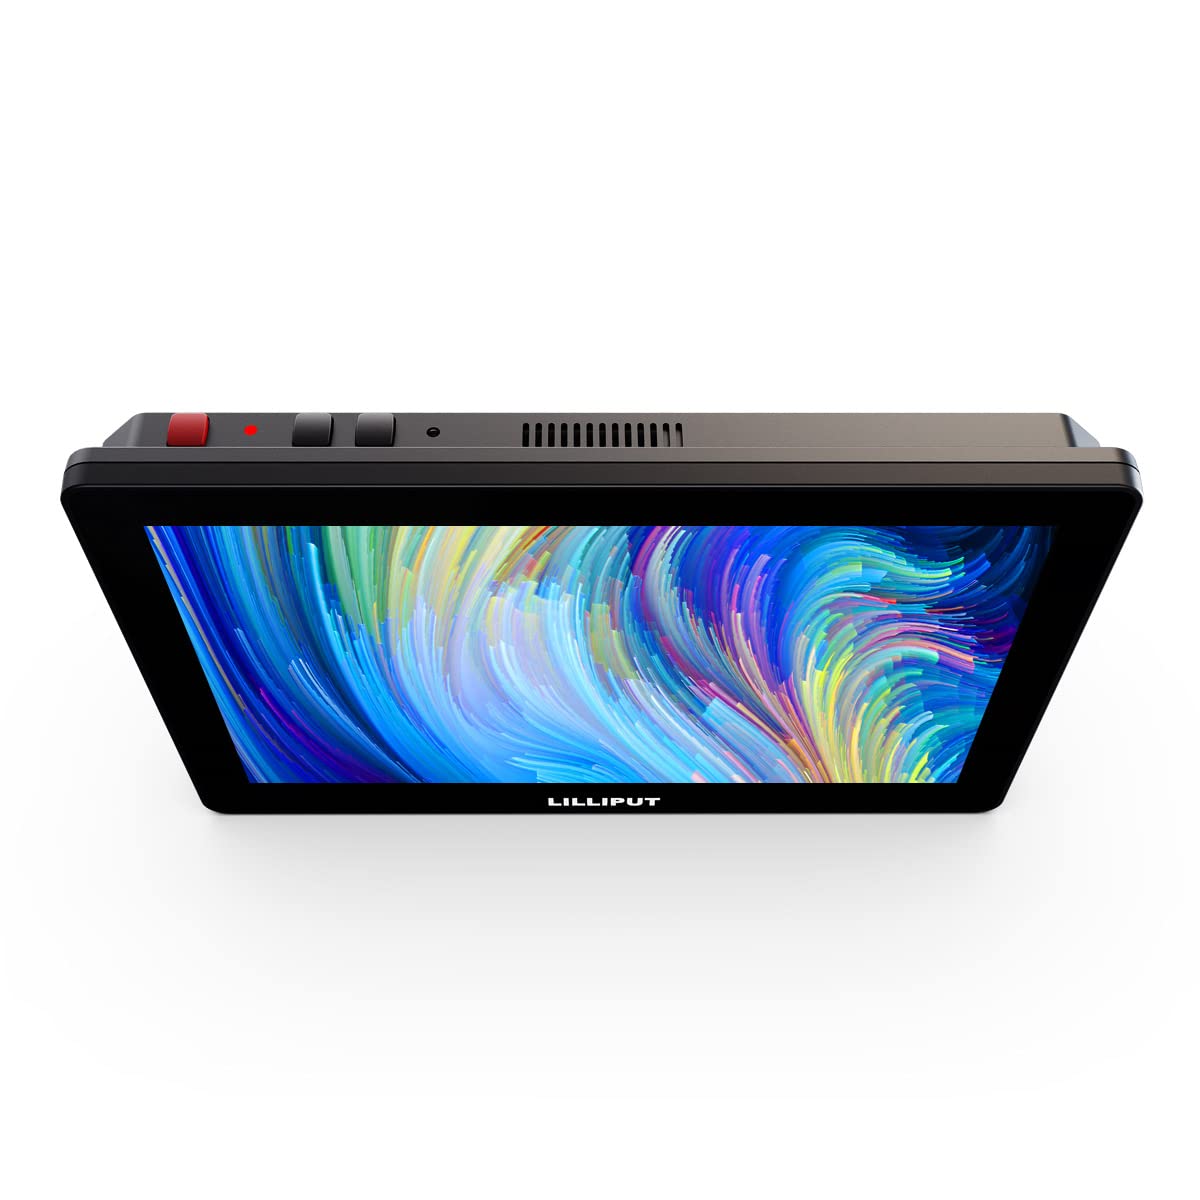 LILLIPUT HT series 2000nits Ultra-Bright Touch Control Screen with HDMI 2.0 3G-SDI Input Output LANC 3D-LUT Waveform Histogram 5